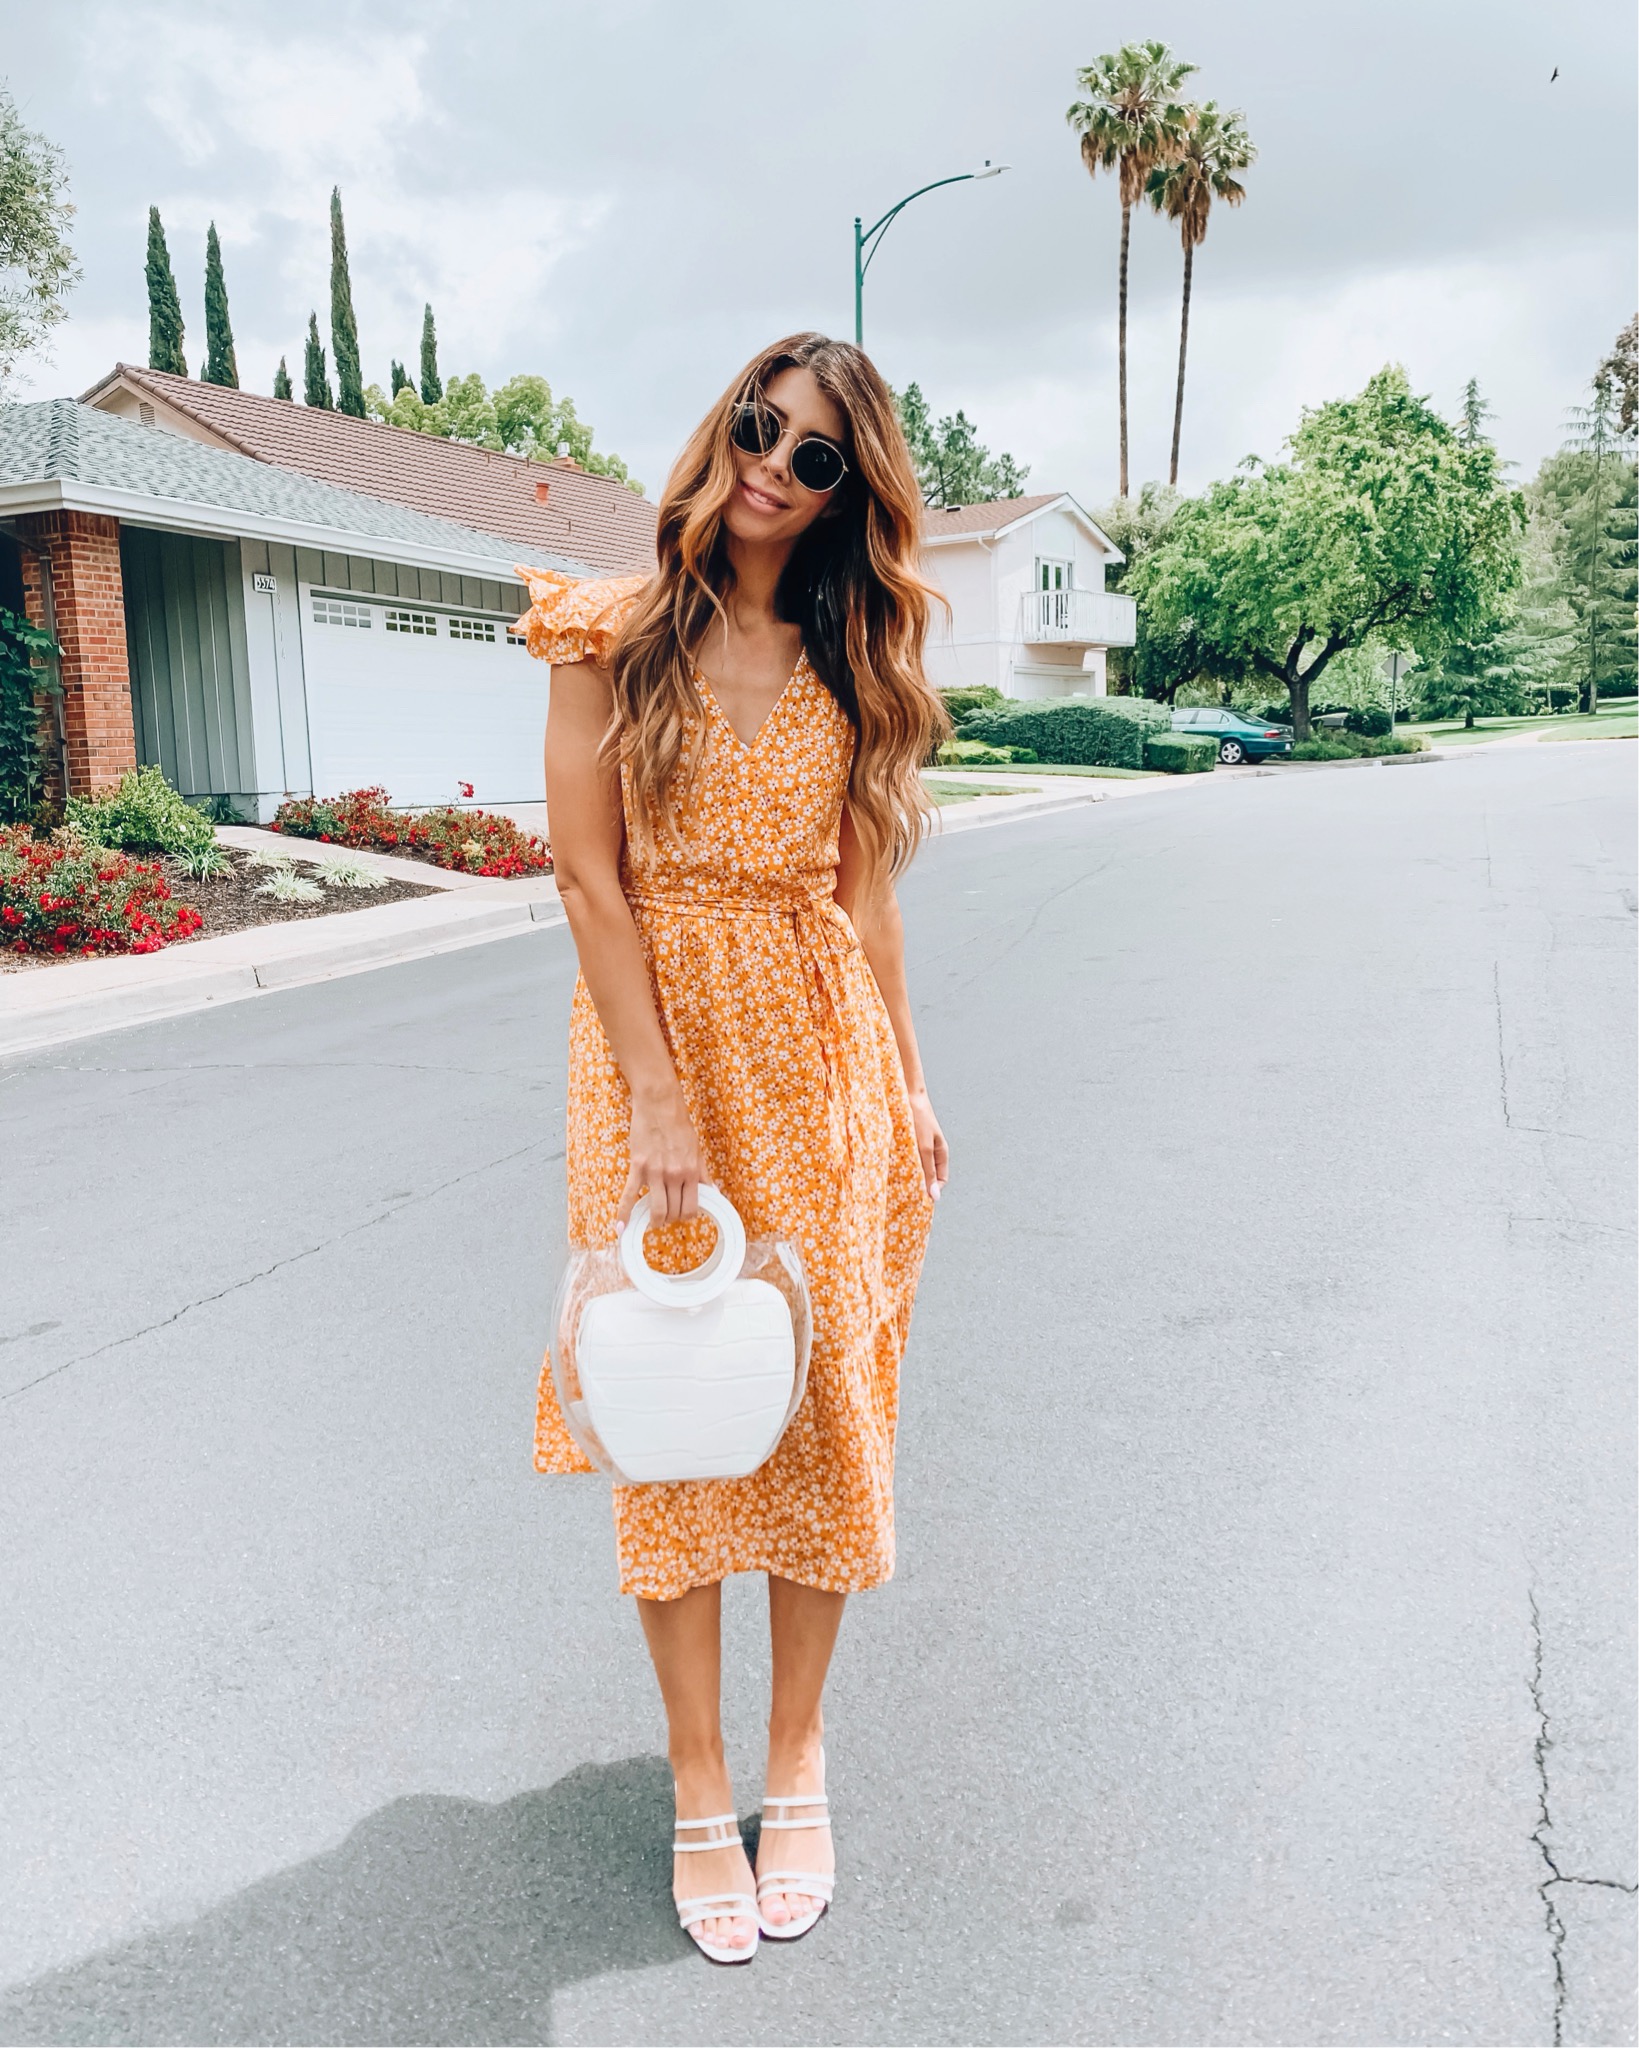 Cute Summer Dresses featured by top US fashion blog The Girl in the Yellow Dress; Image of a woman wearing an orange floral dress.